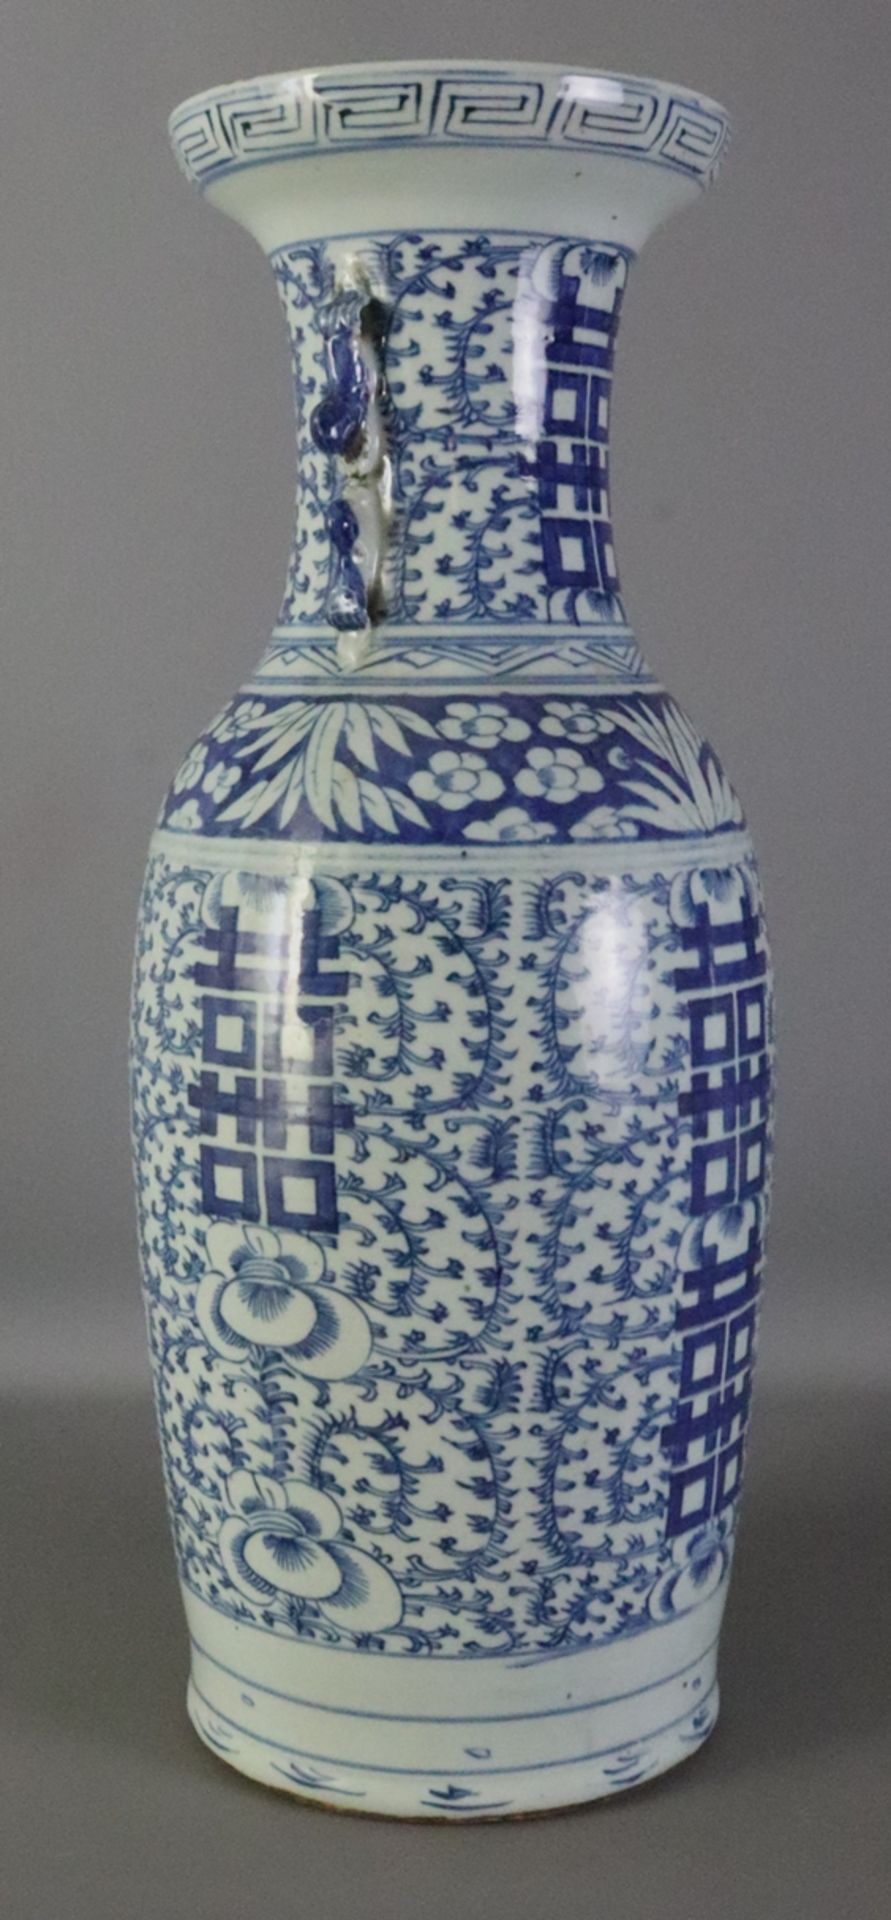 Qing dynasty, pair of vases China early 19th century - Image 3 of 3